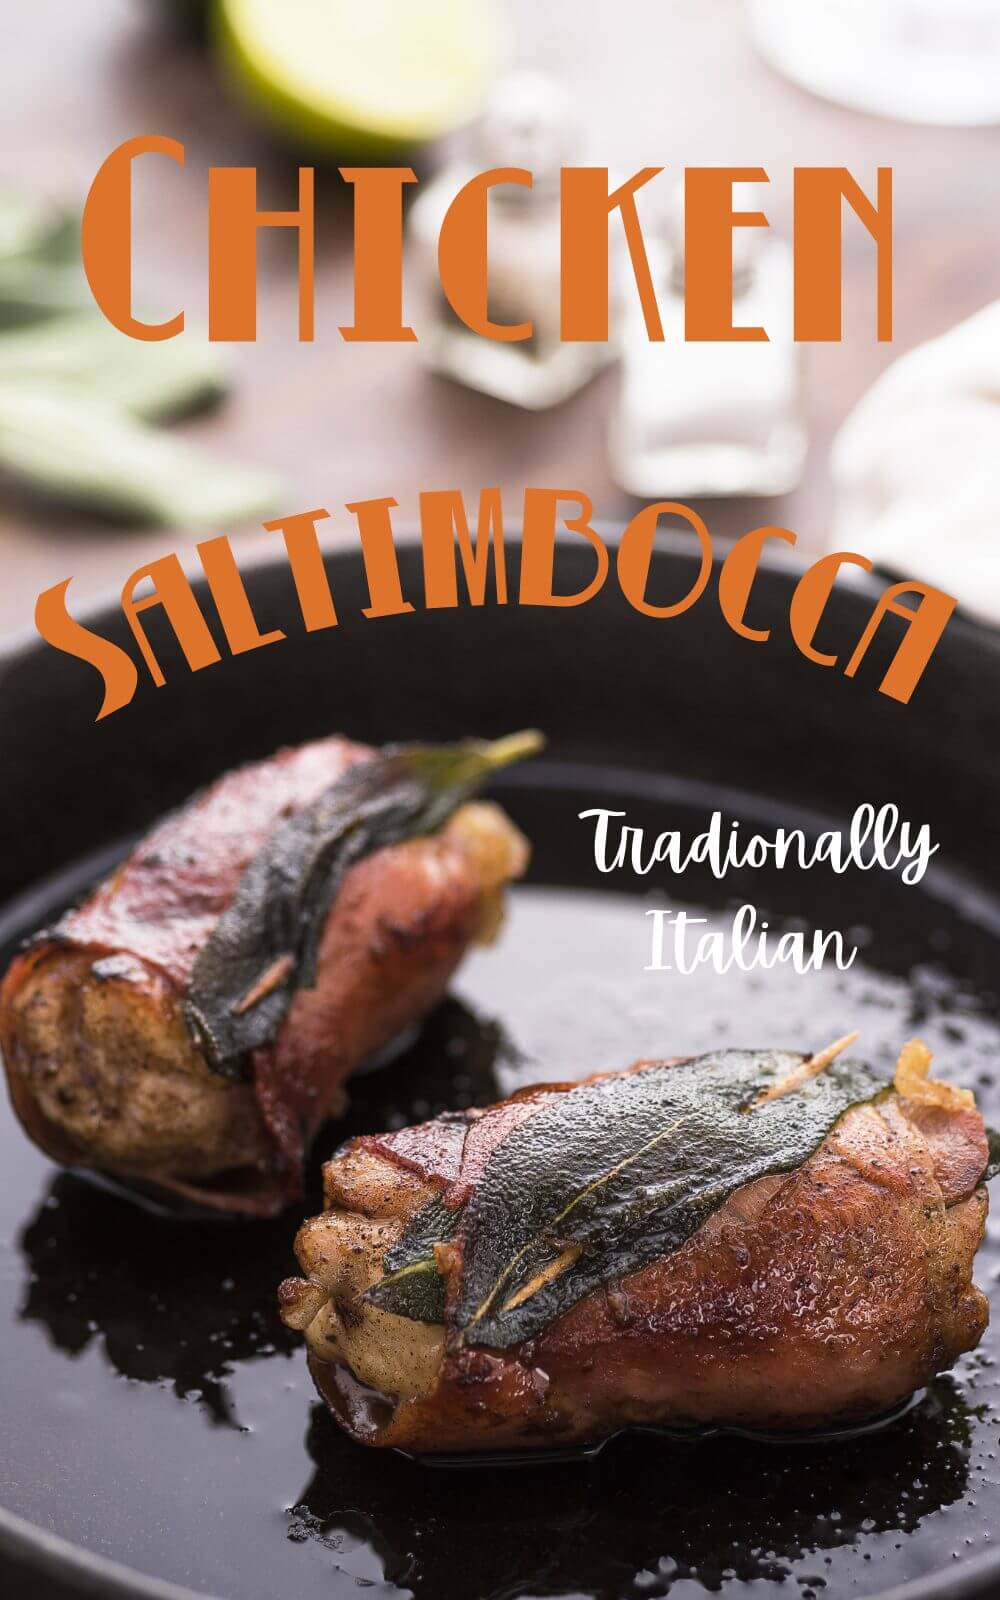 A traditionally Italian rustic dish that features chicken wrapped with prosciutto and seasoned with sage. The chicken is served with a fresh tomato sauce with kalamata olives. Delicious as an easy weeknight chicken dinner or a special company meal. #chickendinner #chickensaltimbocca #Italianchickendinner #easyweeknightdinner